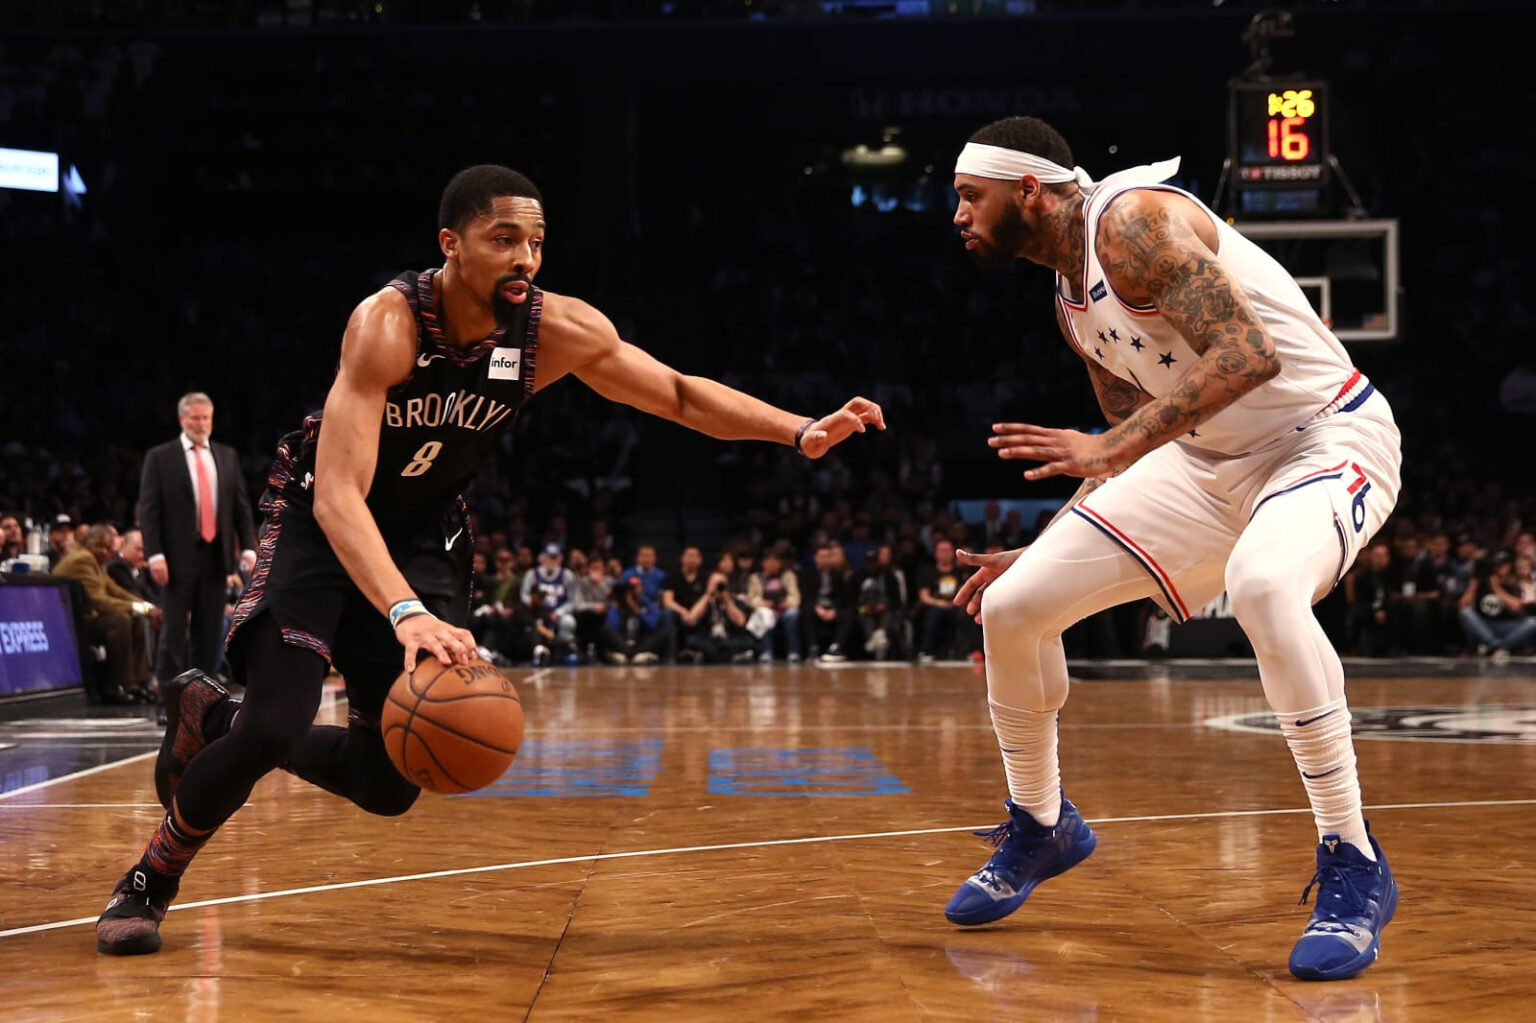 Is Kyrie Irving injured? Learn why fans are asking that question after a last-minute scratch before the Nets vs. 76ers matchup.